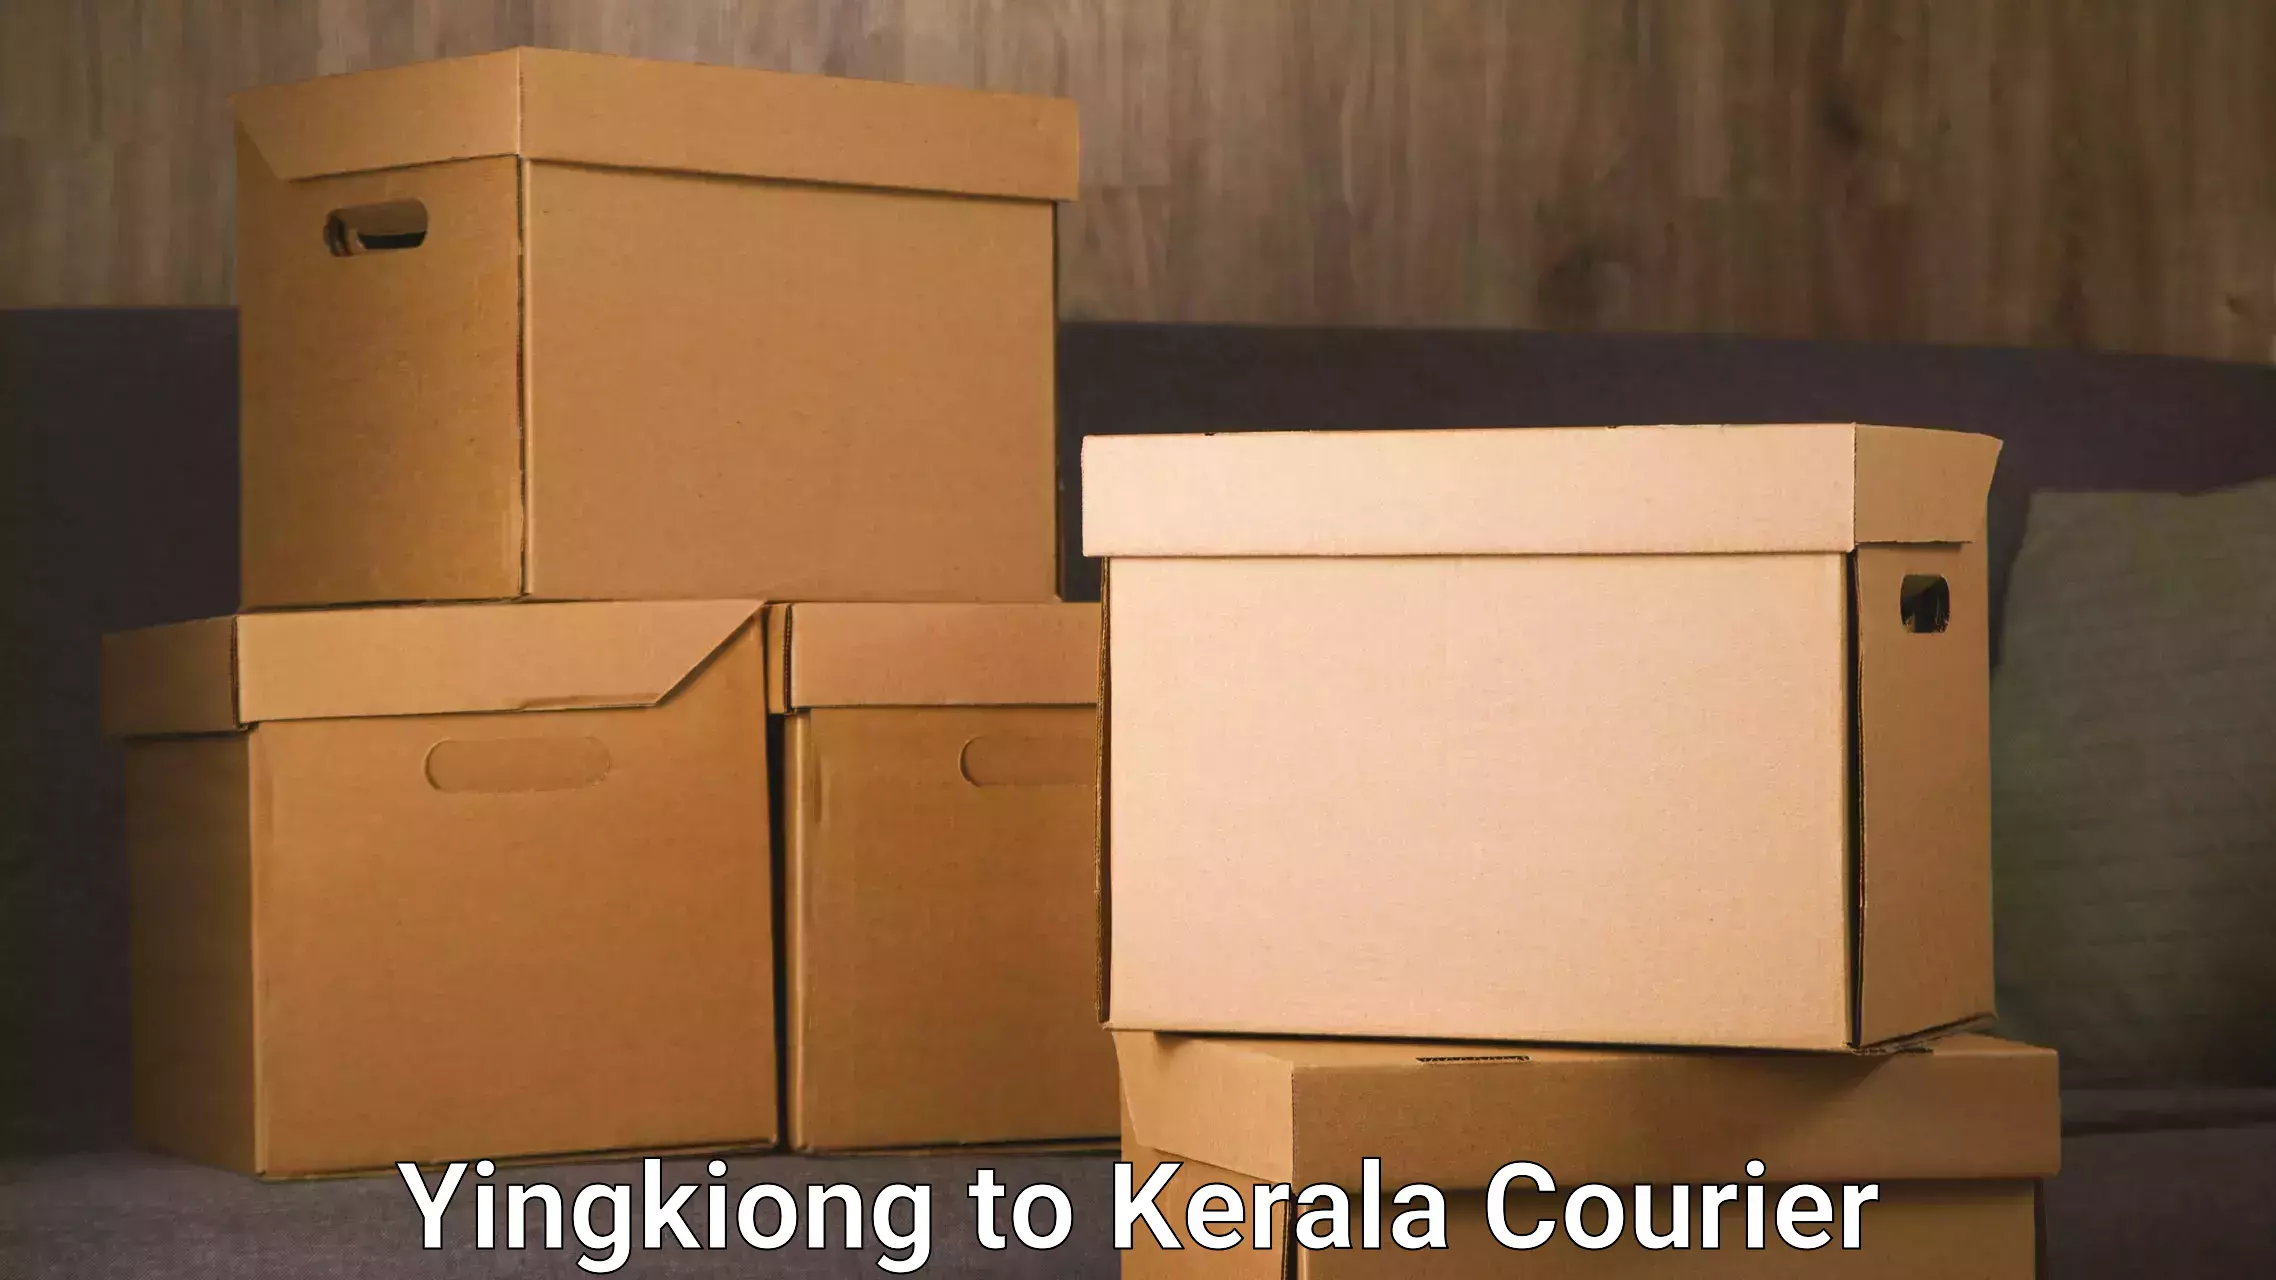 International courier networks Yingkiong to Mahe